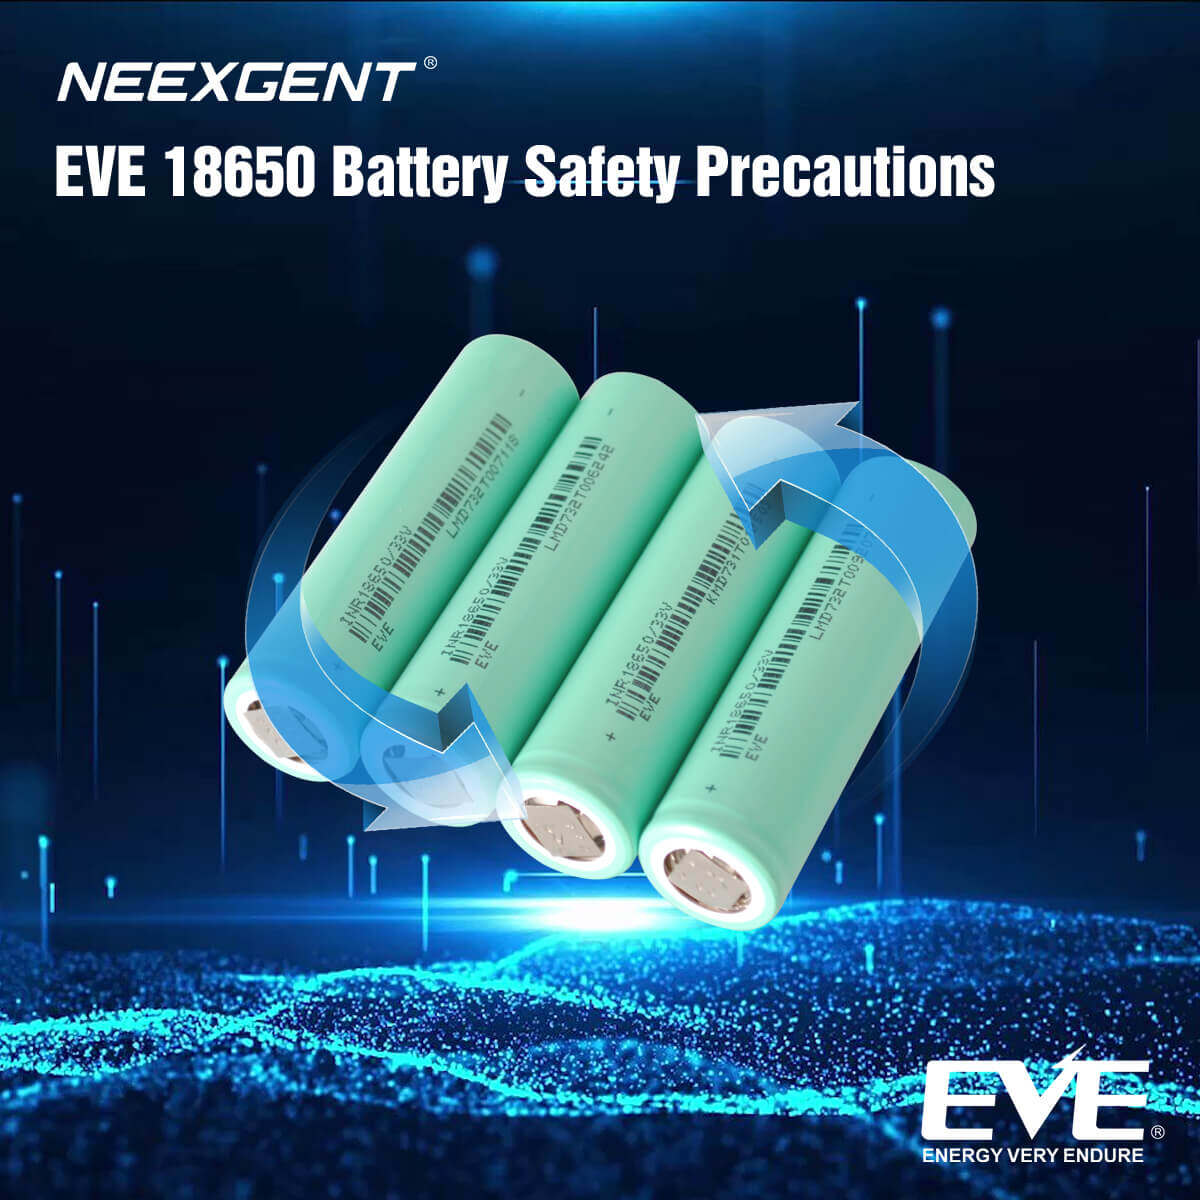 EVE 18650 Battery Safety Precautions